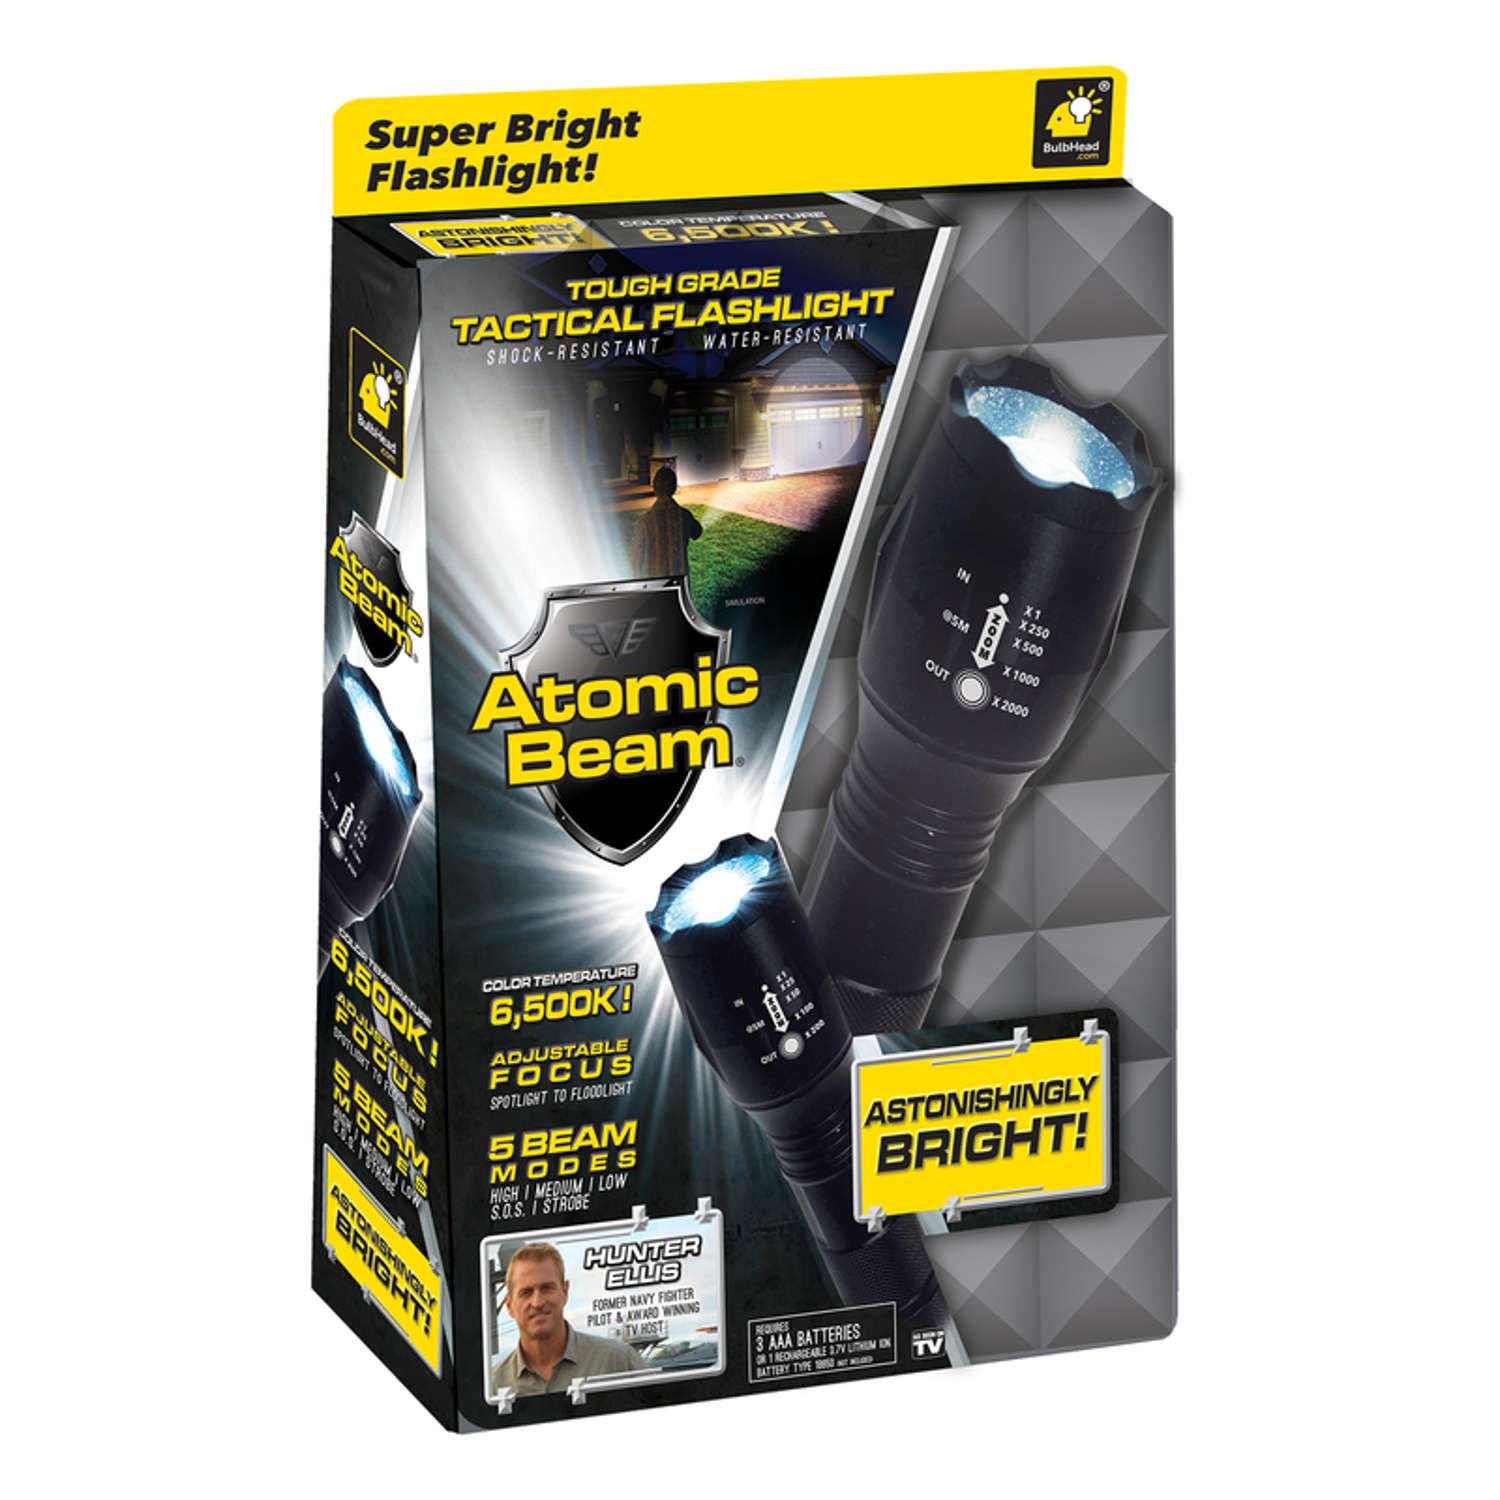 4-RECHARGEABLE BATTERY'S & 2-CHARGERS FOR ATOMIC BEAM USA FLASHLIGHT 